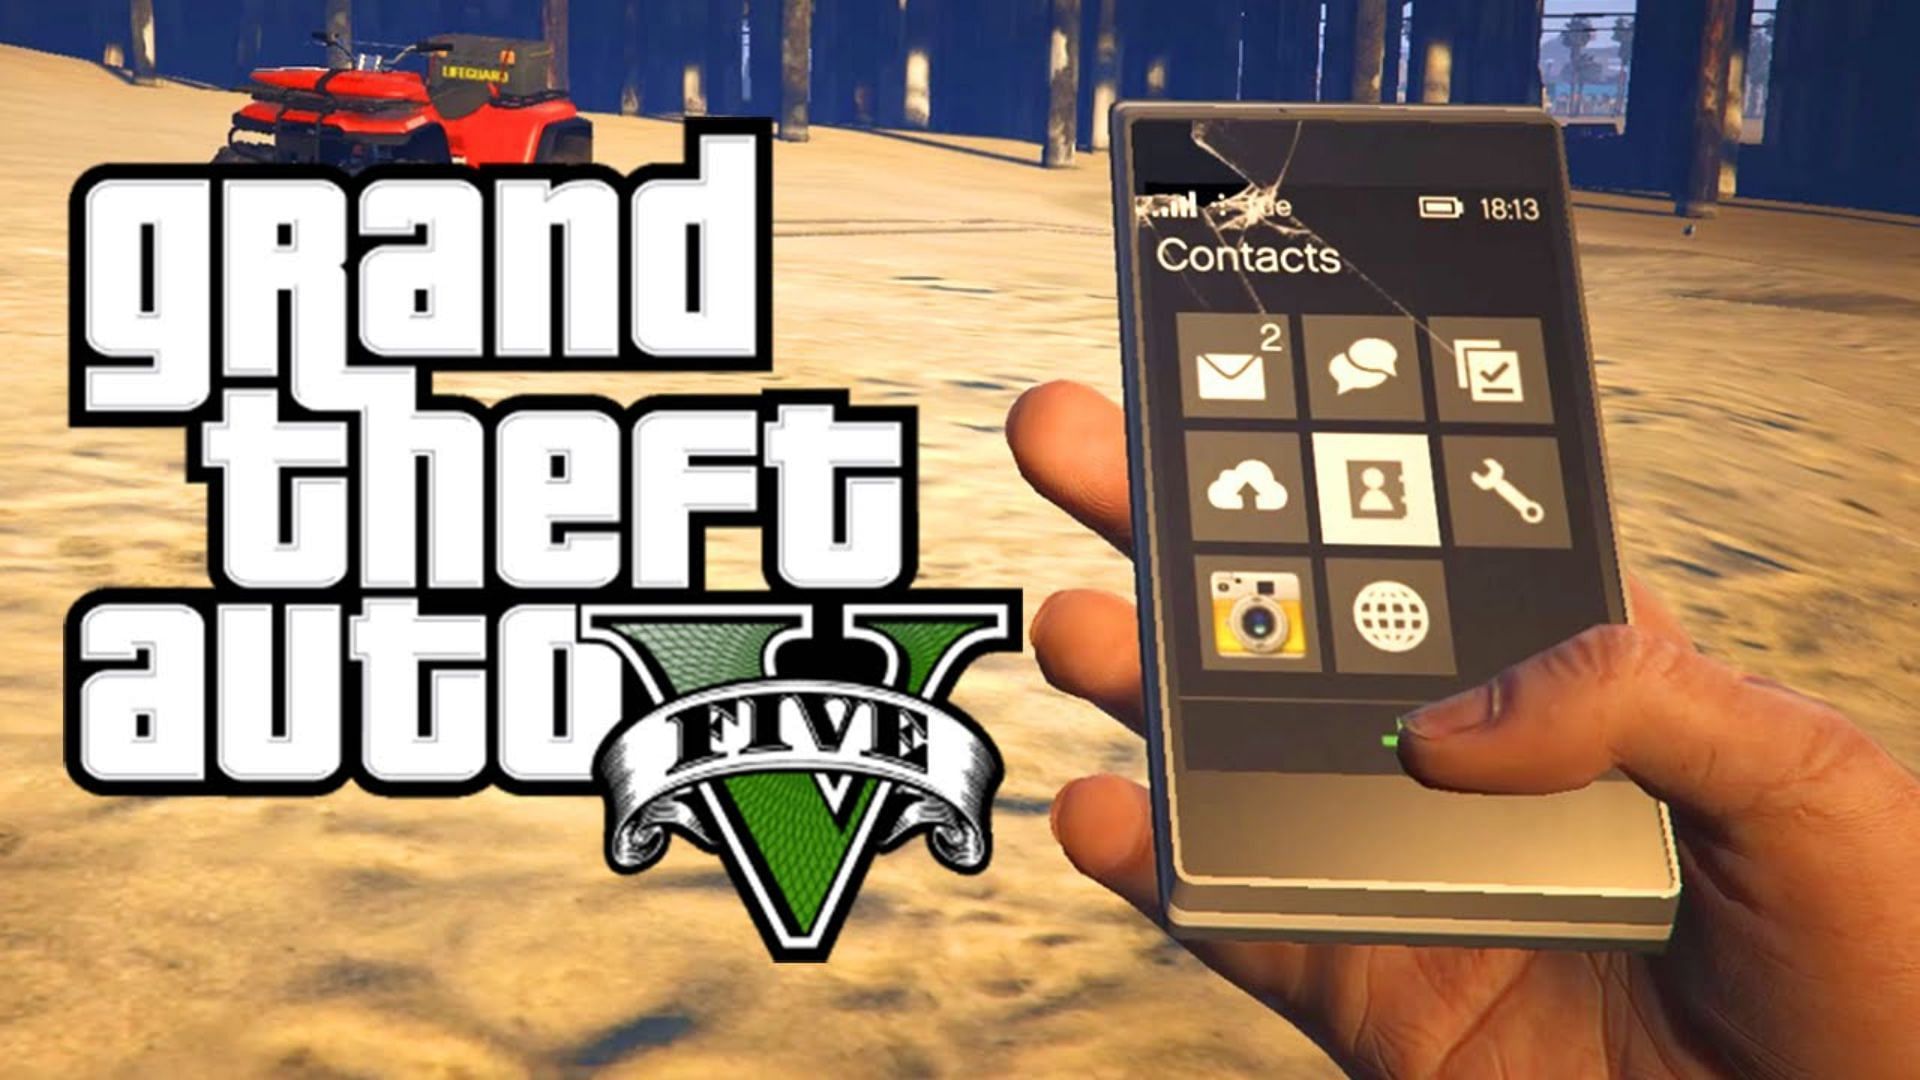 A brief about some of the phone numbers that you can call in GTA 5 (Image via Rockstar Games, Chaotic/YouTube)